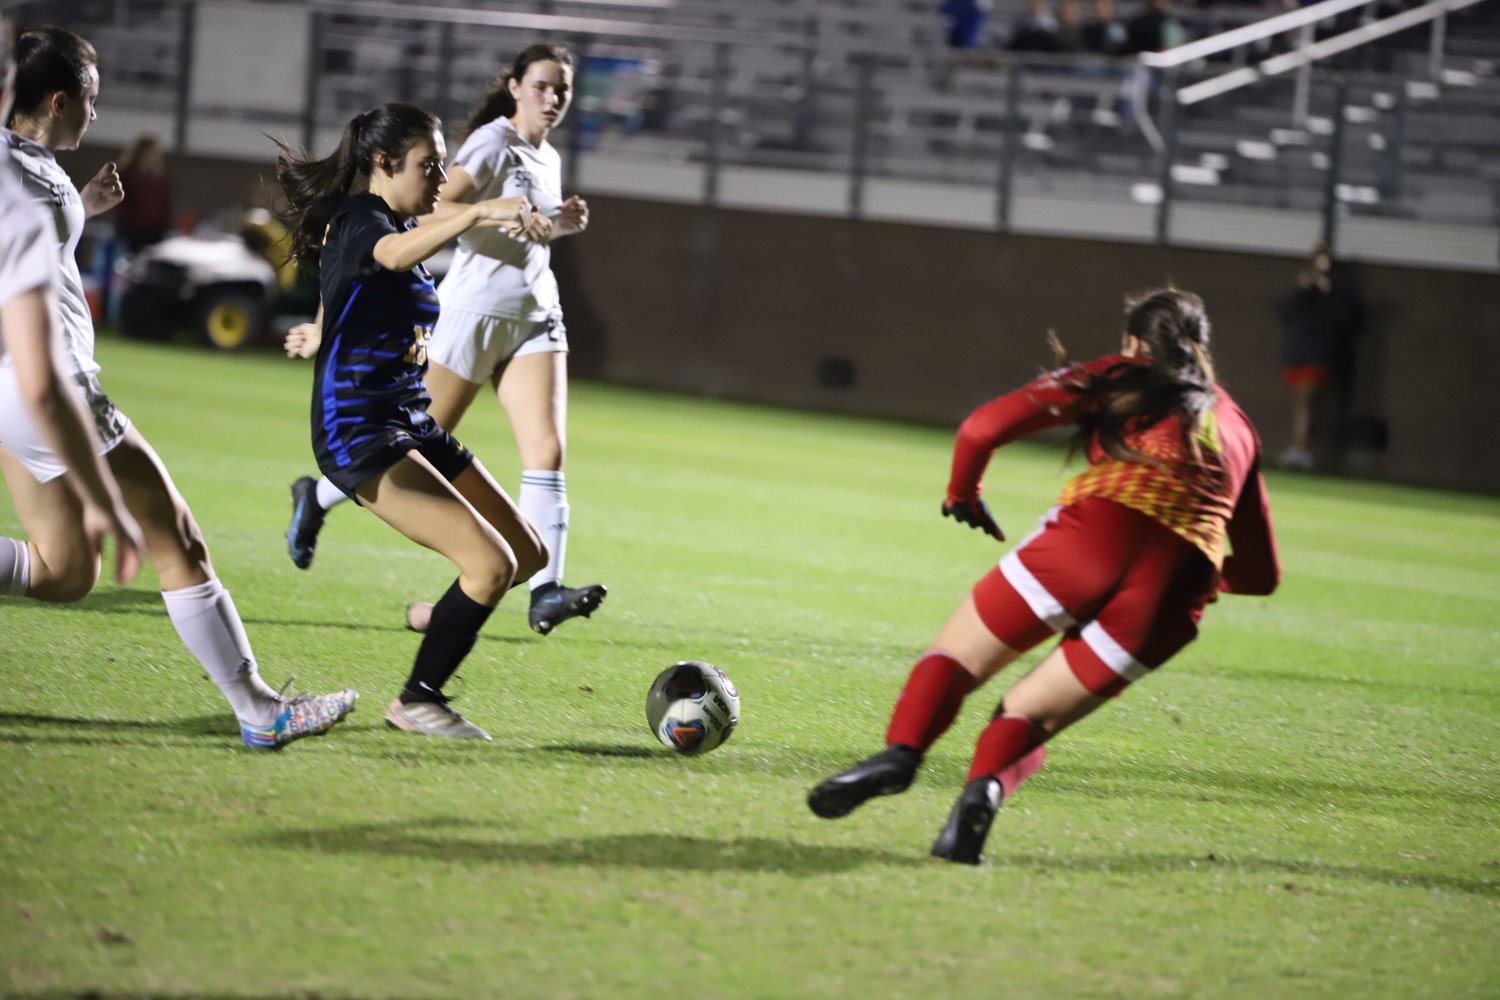 Lexington's Ava Brown with the goal against Spring Valley.